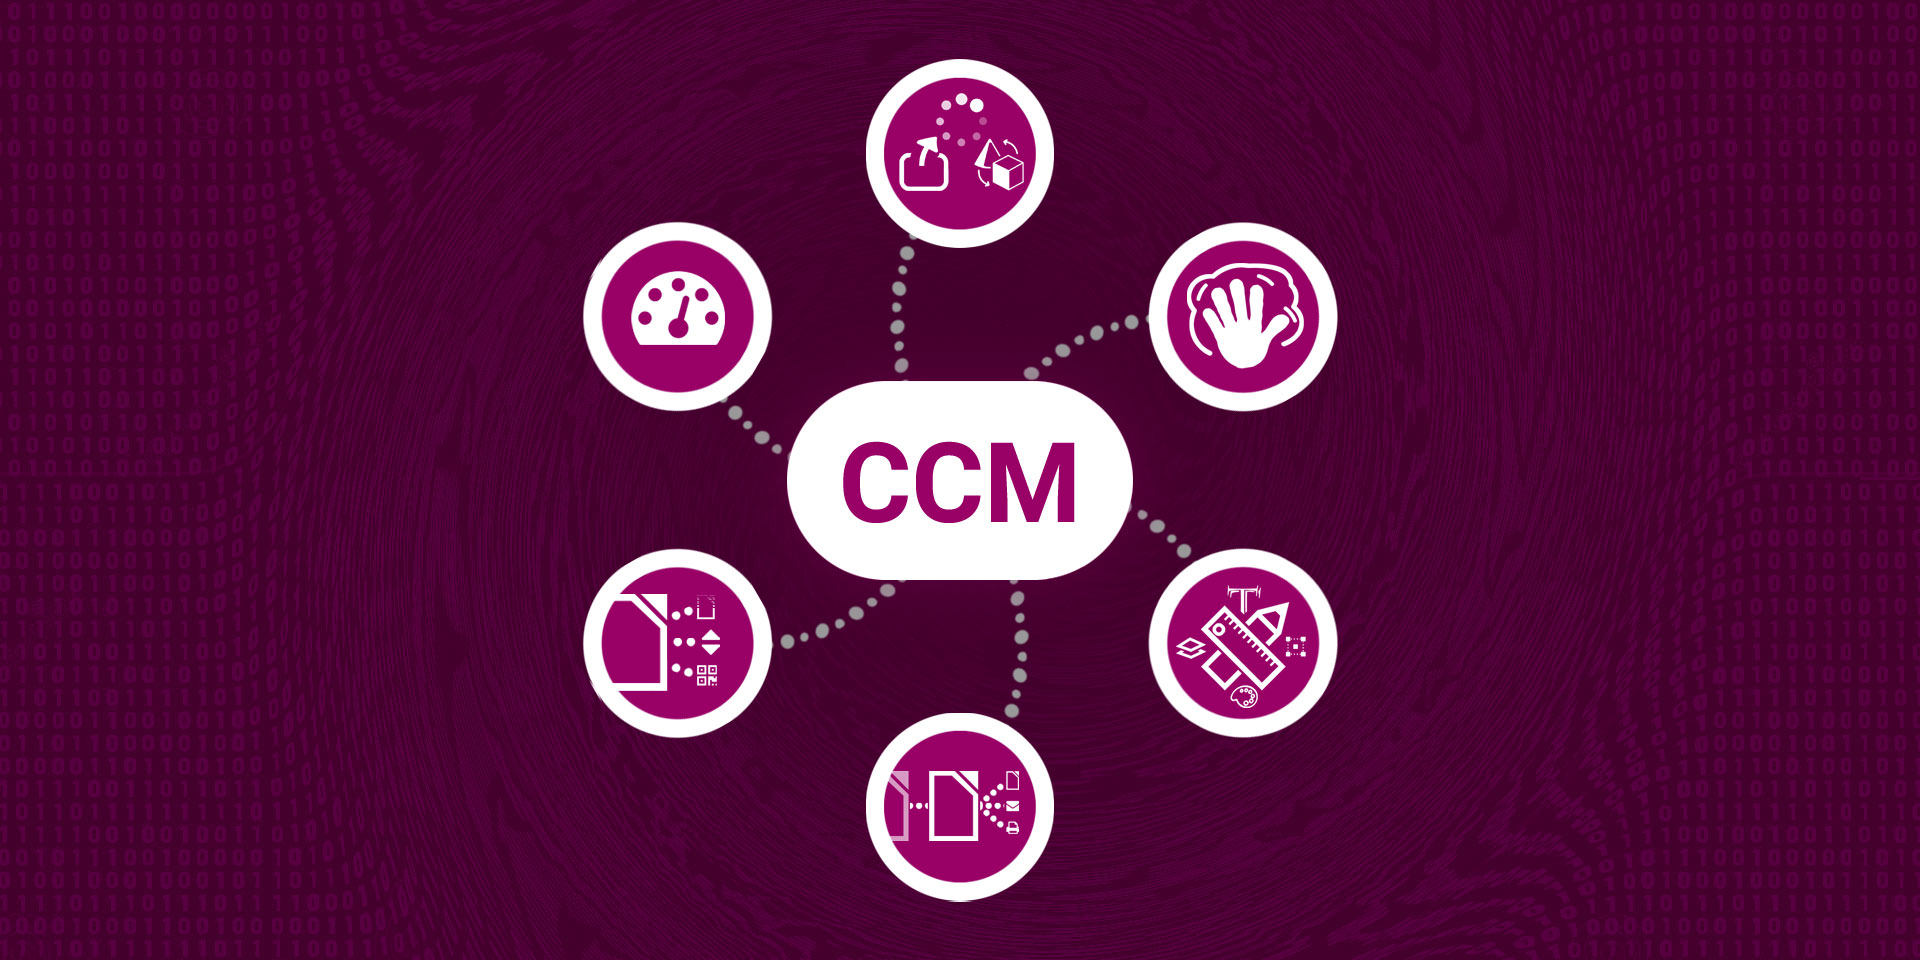 Many customer communications management (CCM) platforms are currently available, but they often emphasize different aspects of business communications.